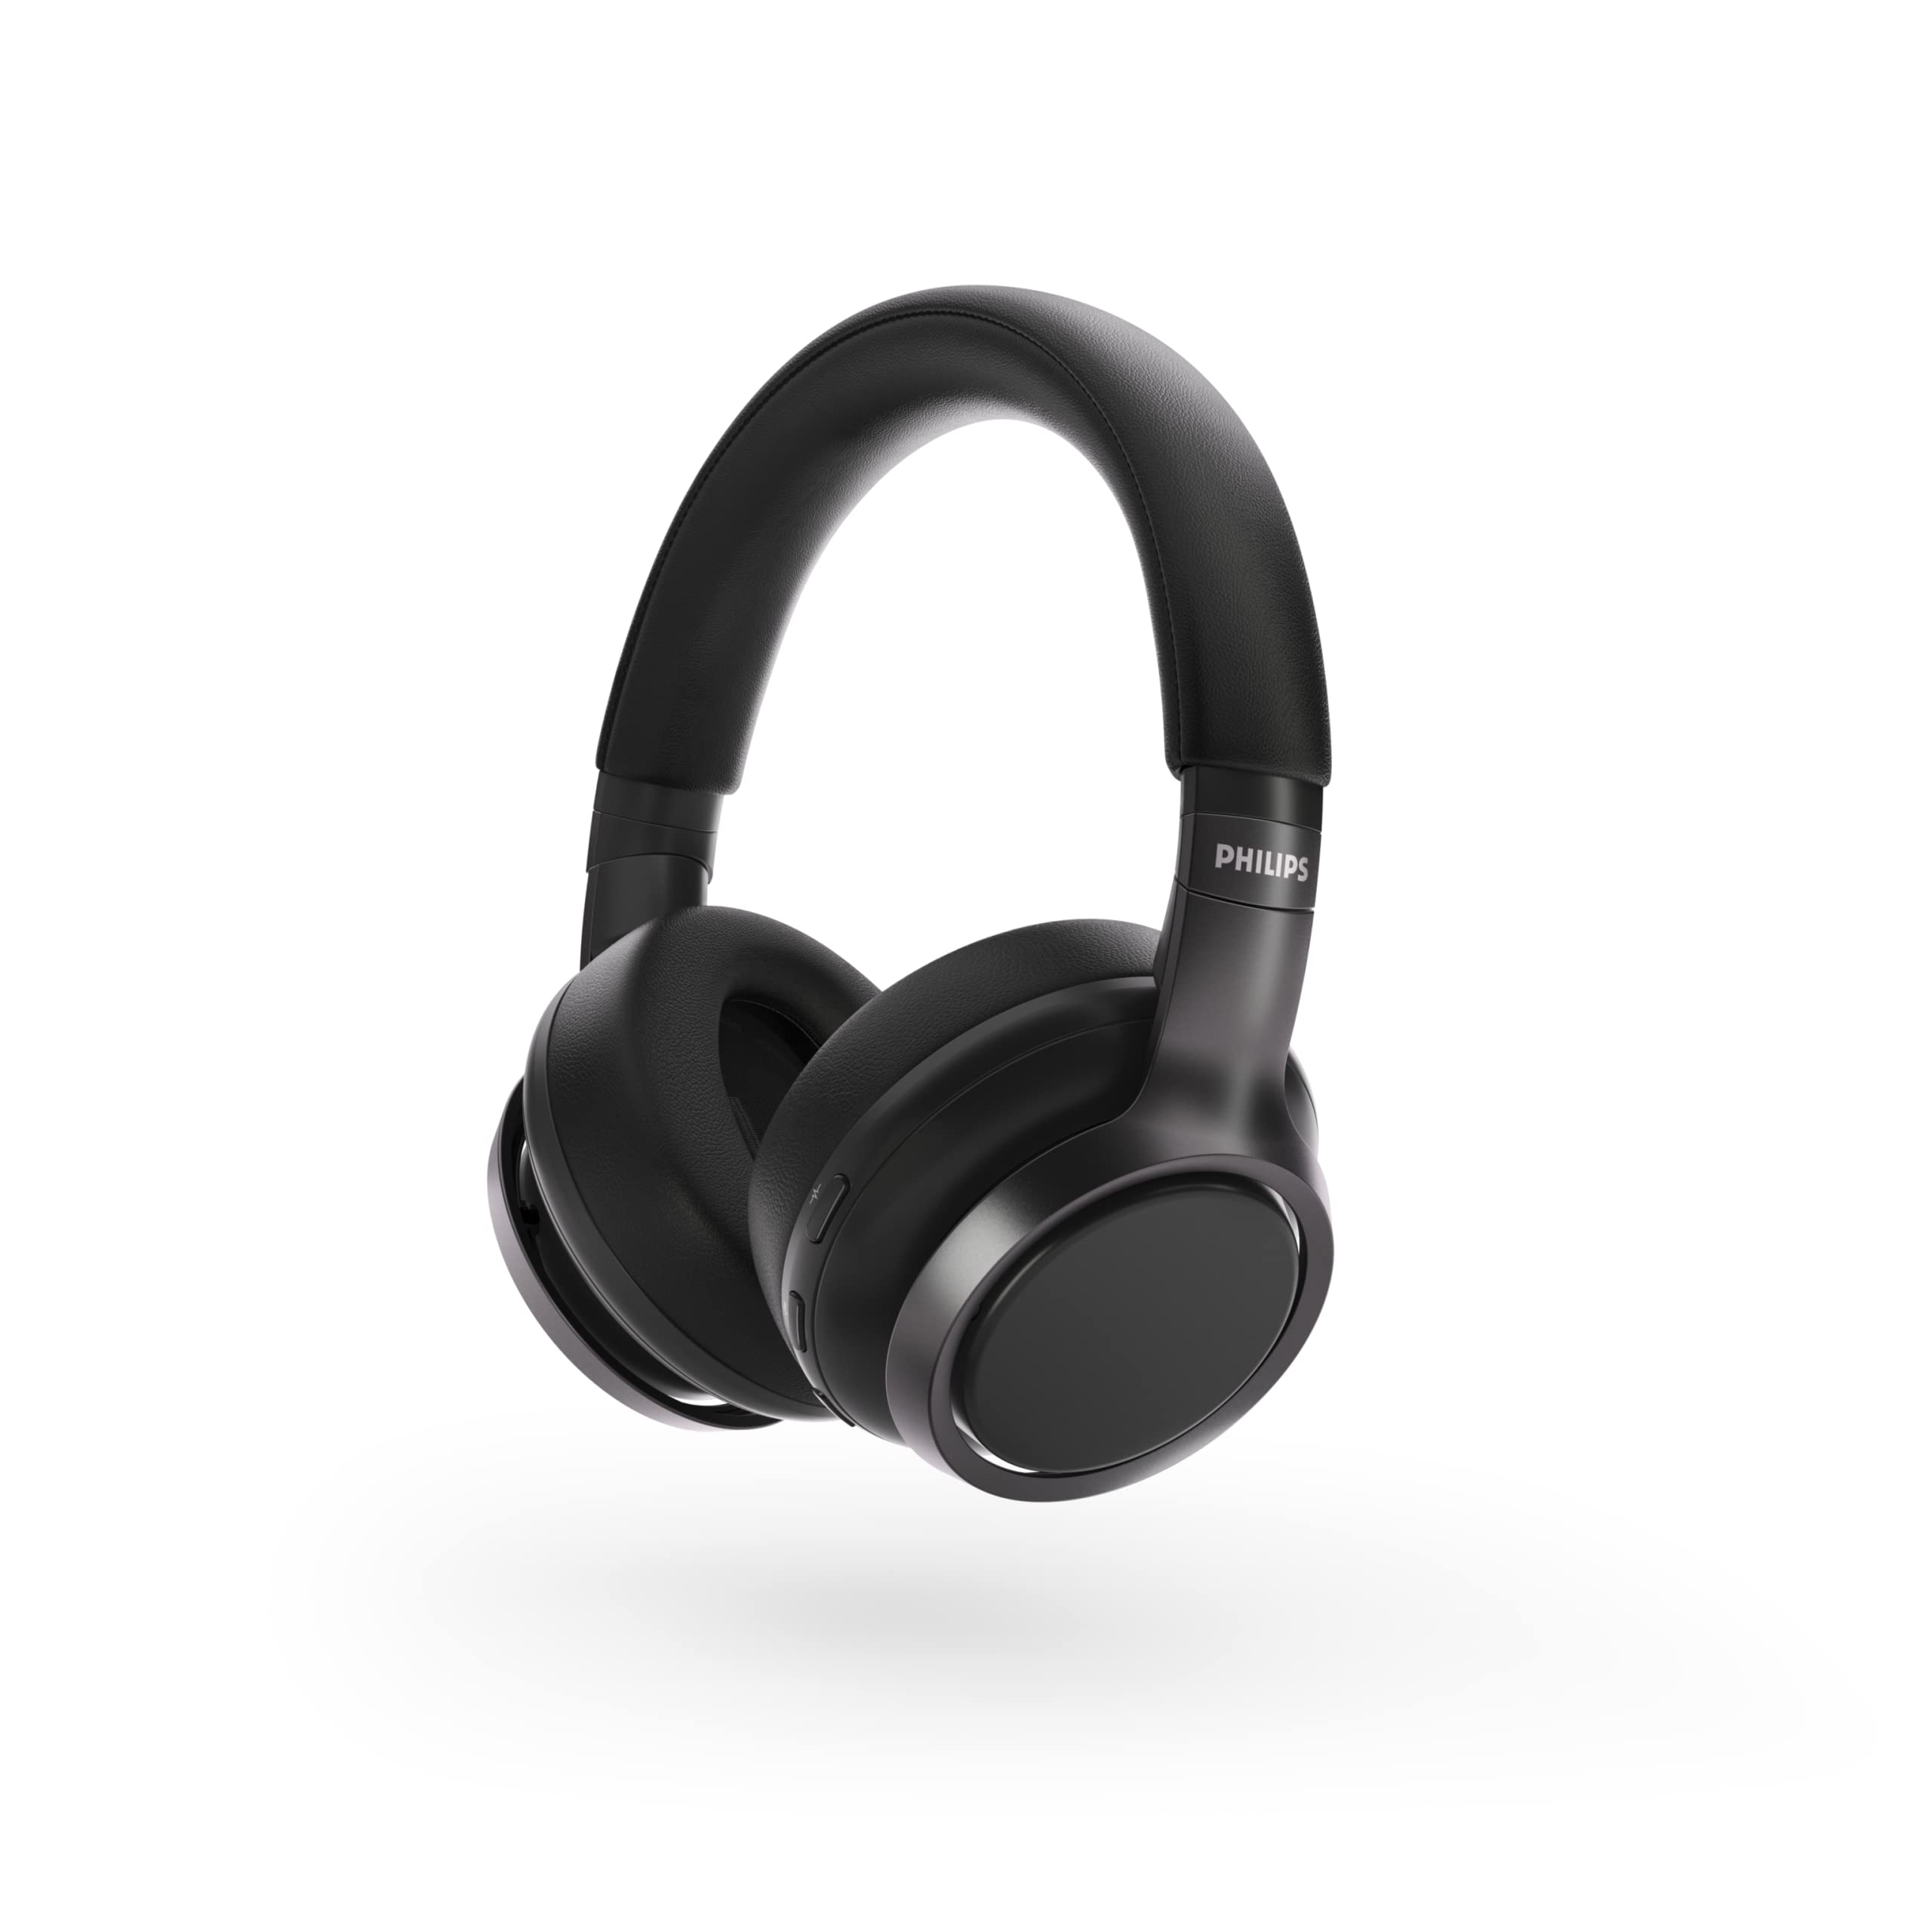 Philips Audio Philips H9505 Hybrid Active Noise Canceling (ANC) Over Ear Wireless Bluetooth Pro-Performance Headphones with Multipoint Bluetooth Connection